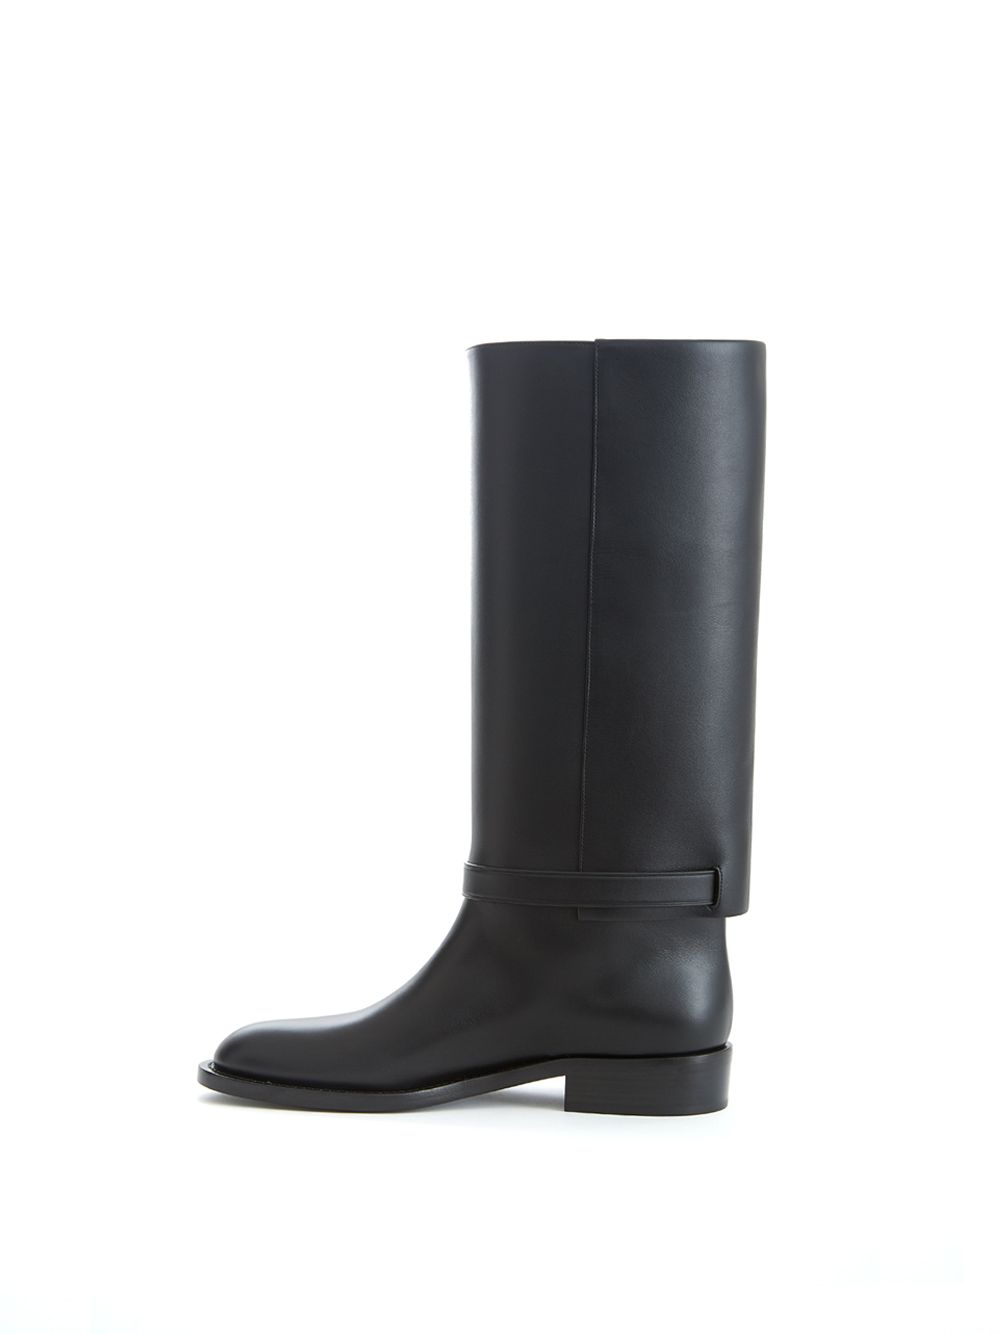 Equestrian Style Luxe Black Leather Boots